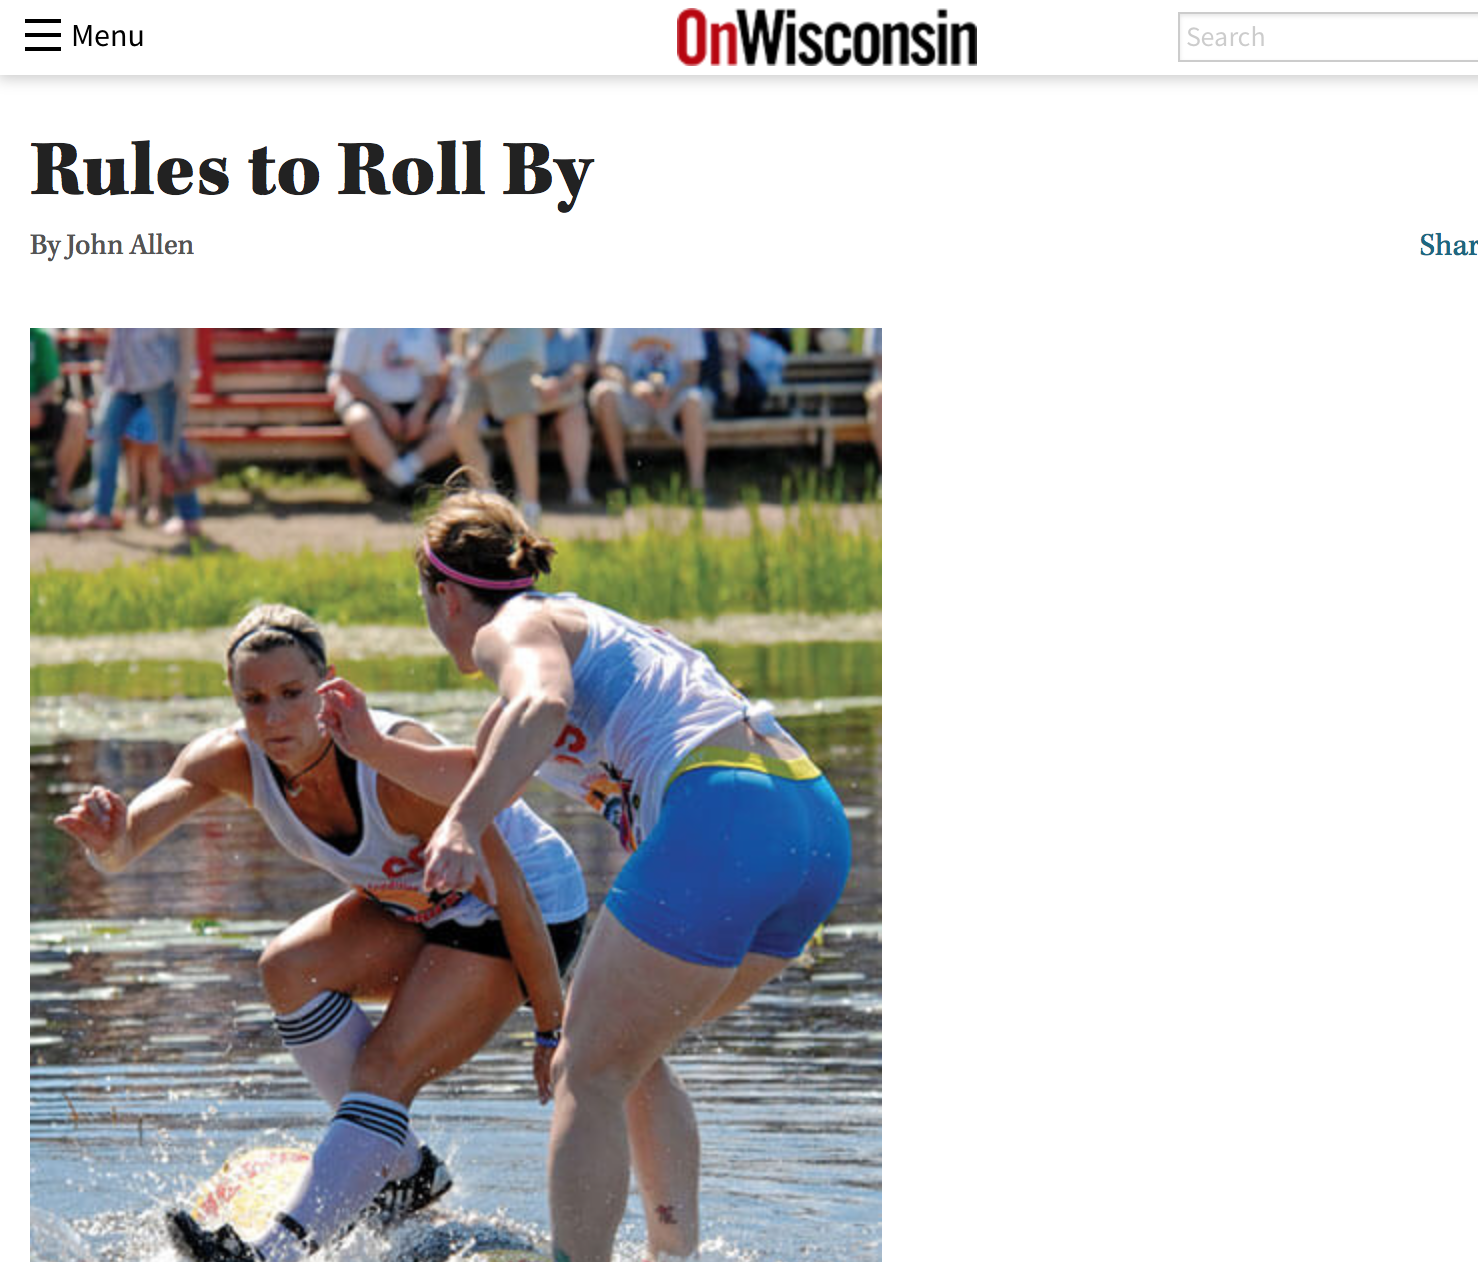 On Wisconsin Magazine: Rules to Roll By 2011